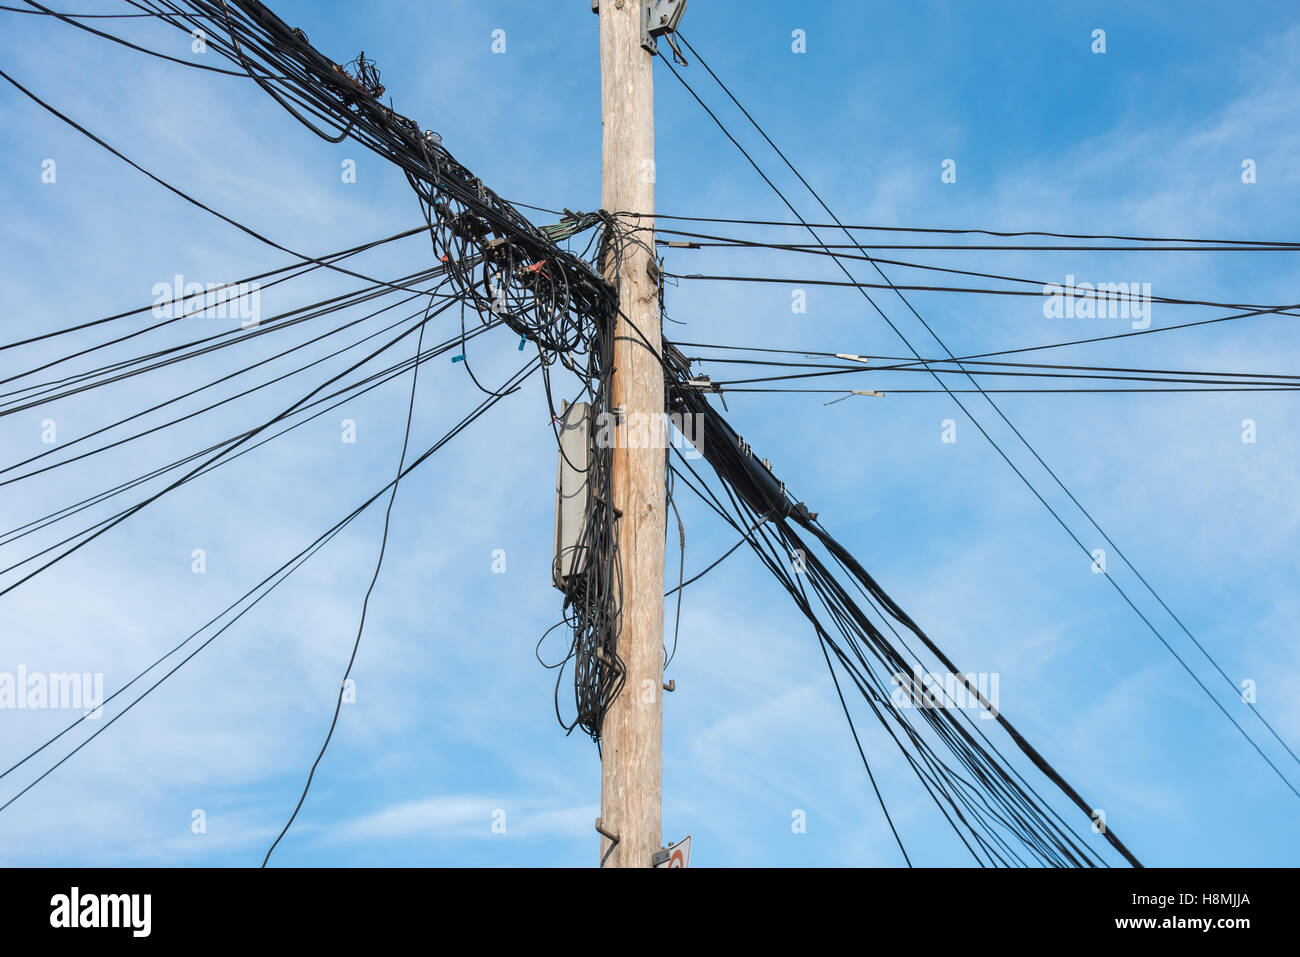 Telephone pole with cable wires Stock Photo